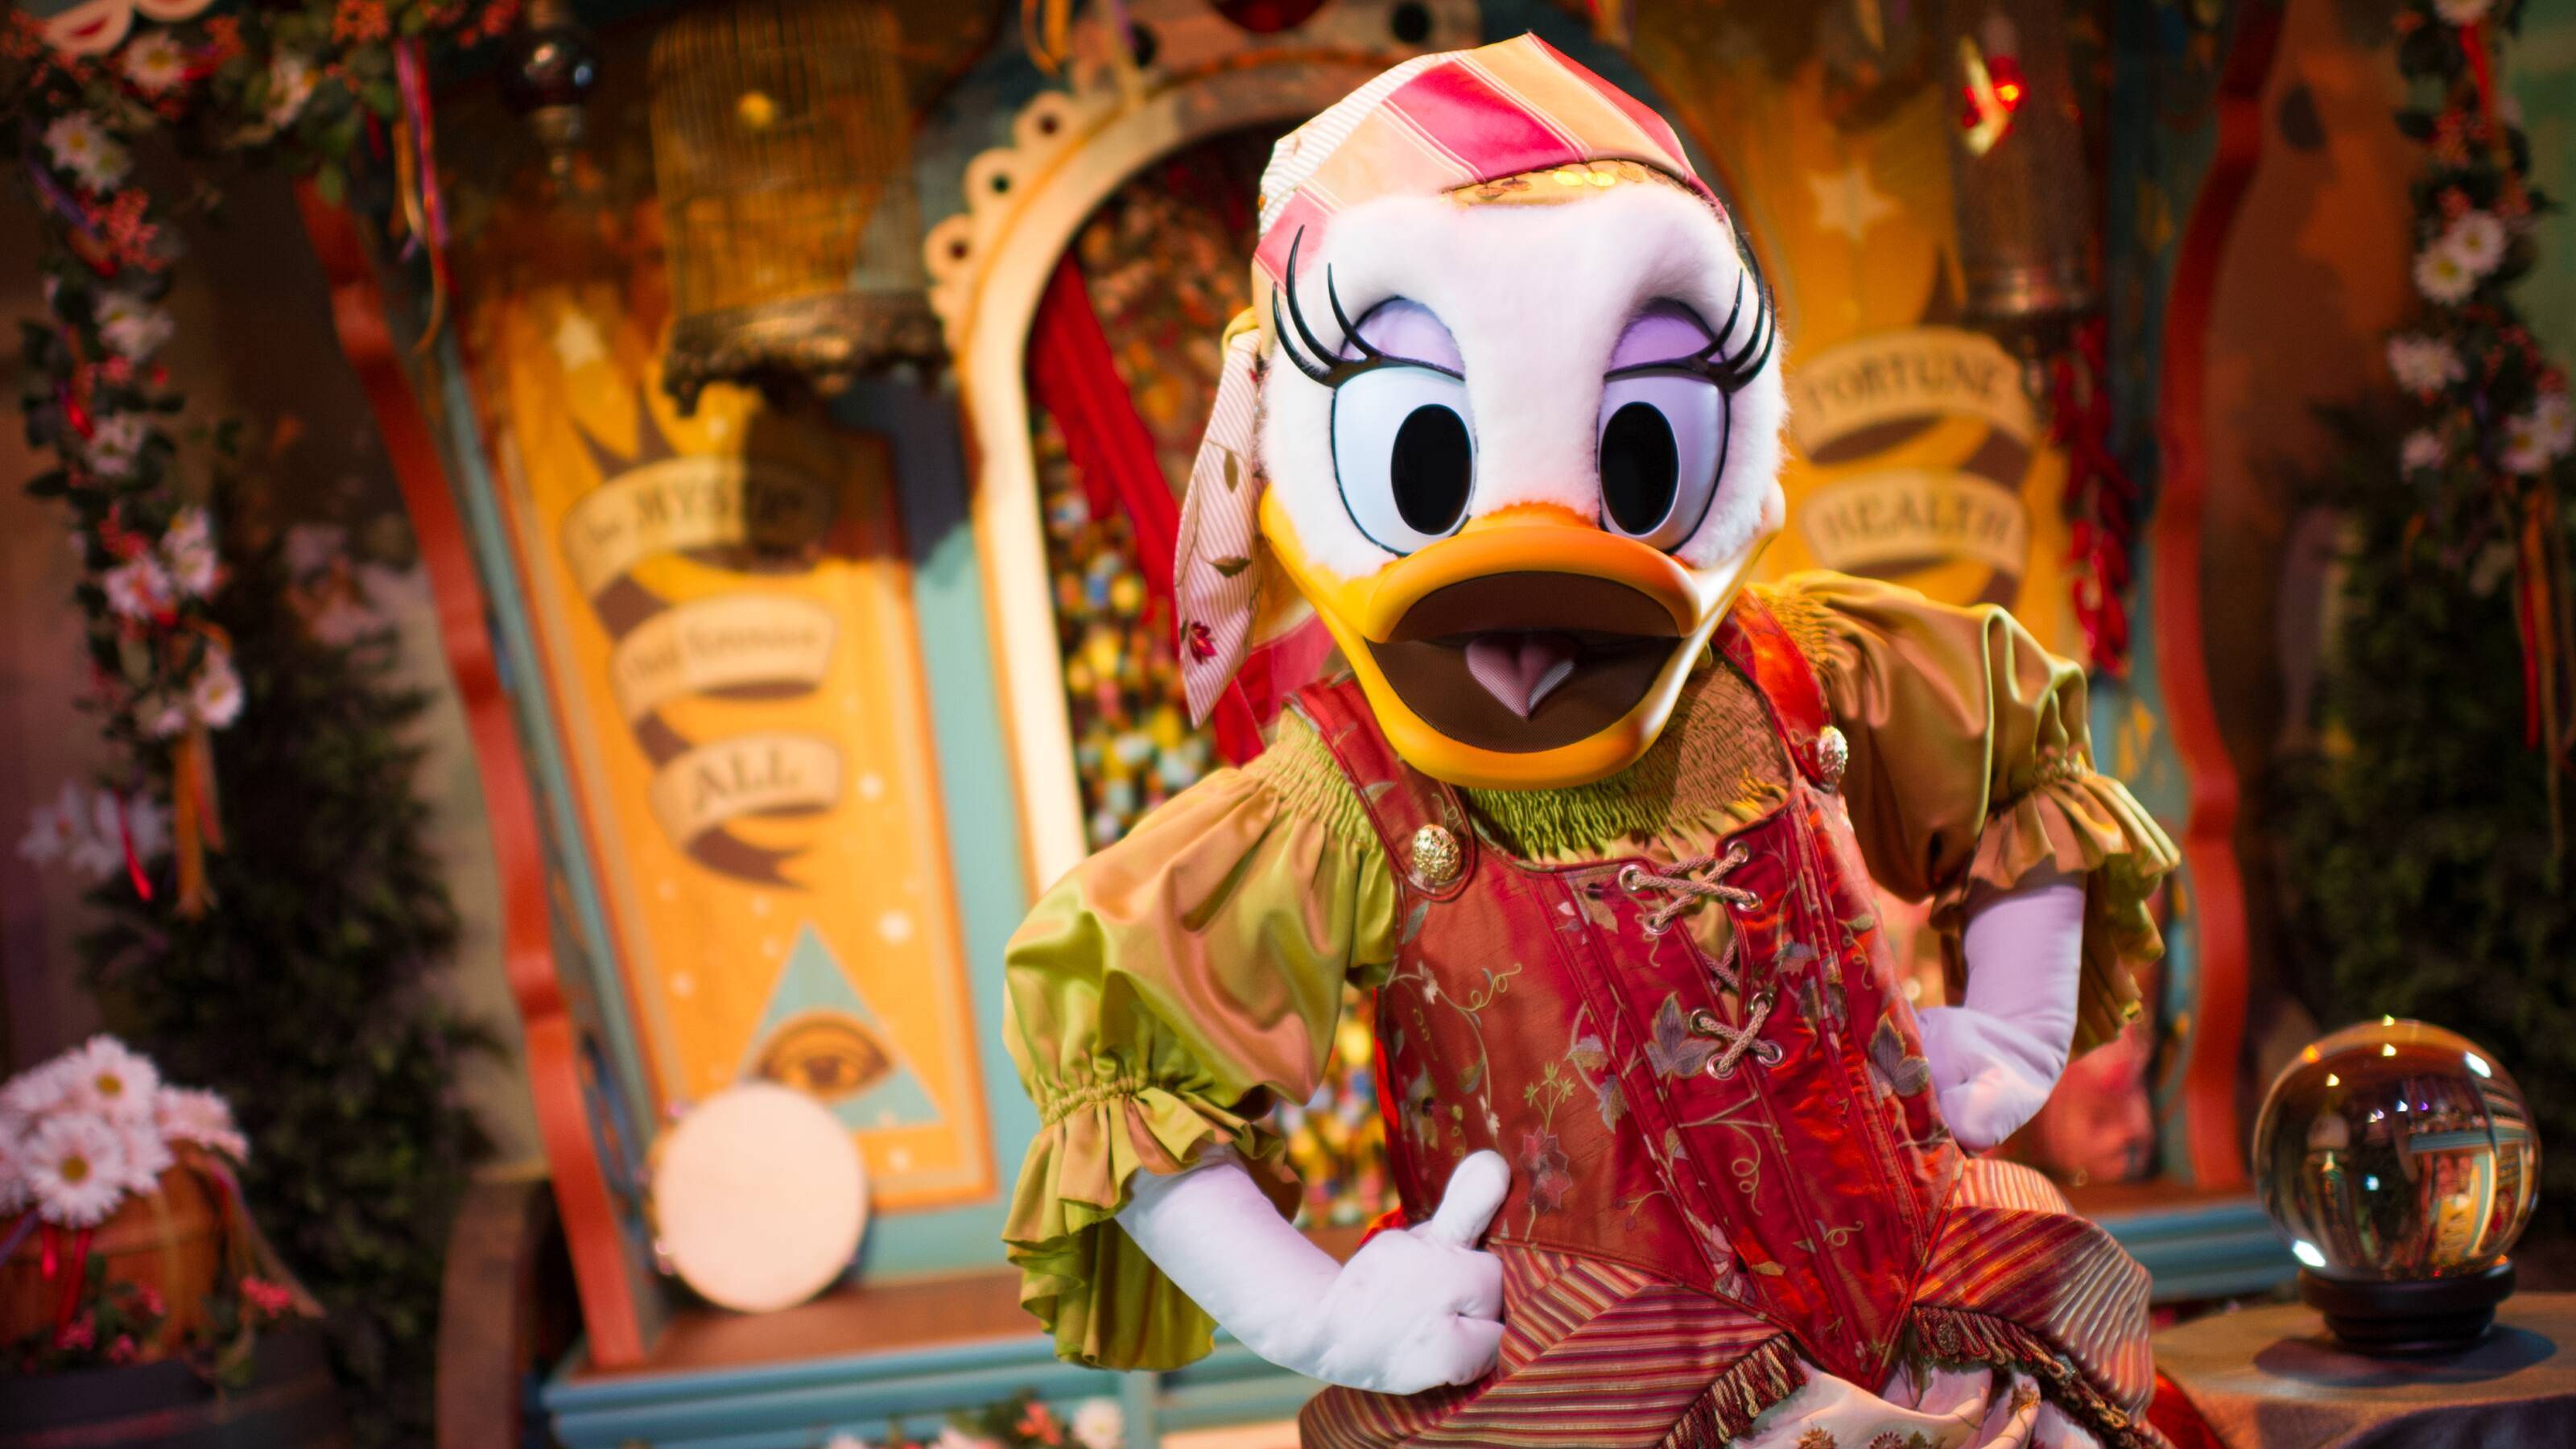 Pete's Silly Sideshow character meet and greet reopens at Magic Kingdom this weekend